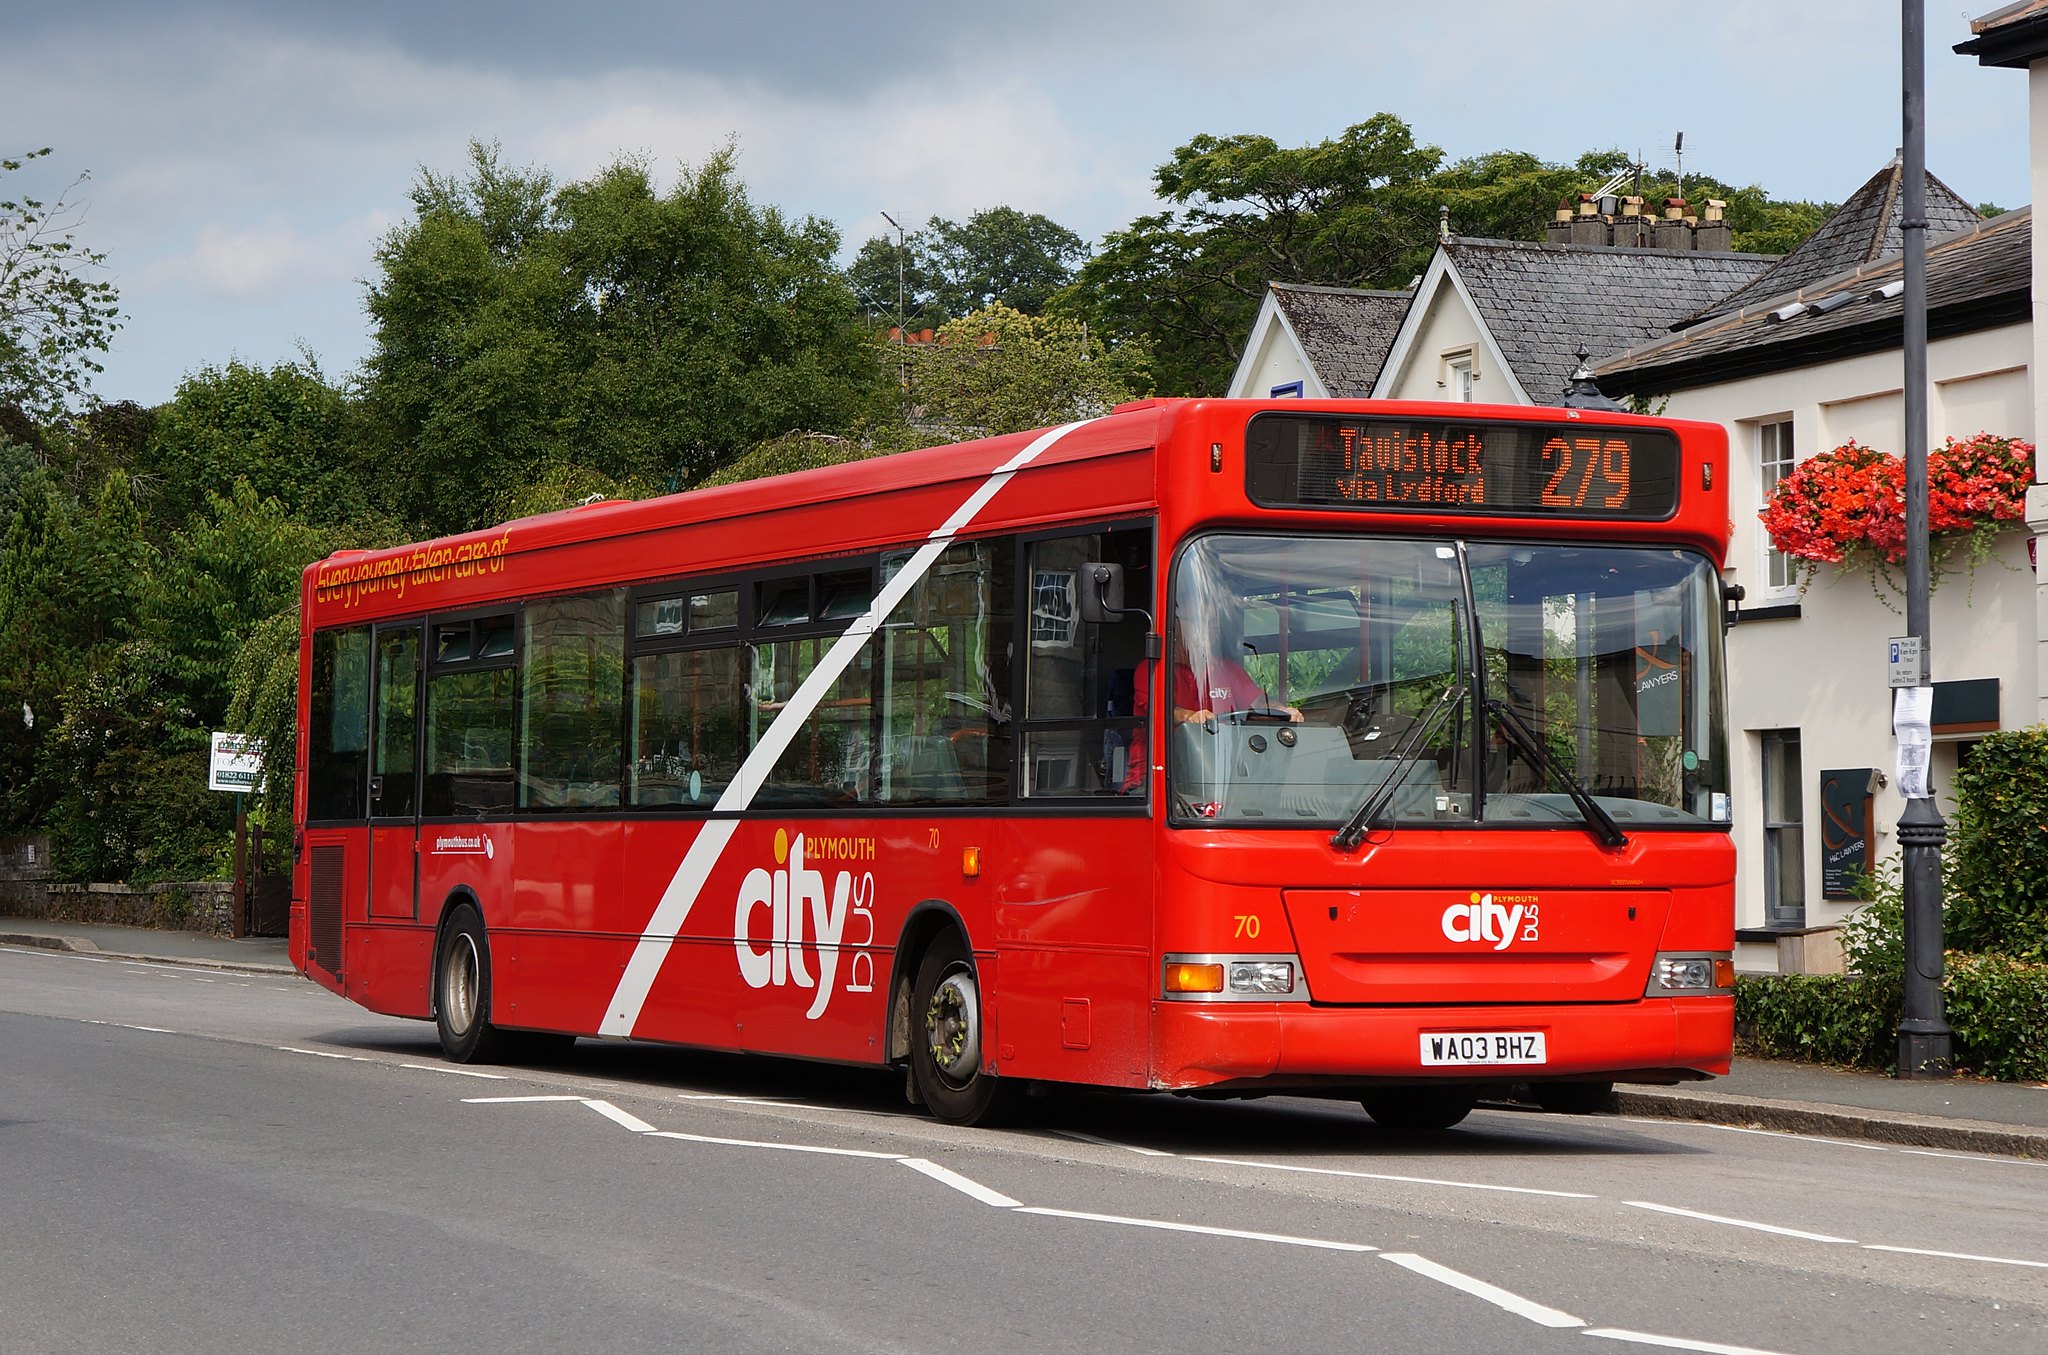 Plymouth Citybus 279